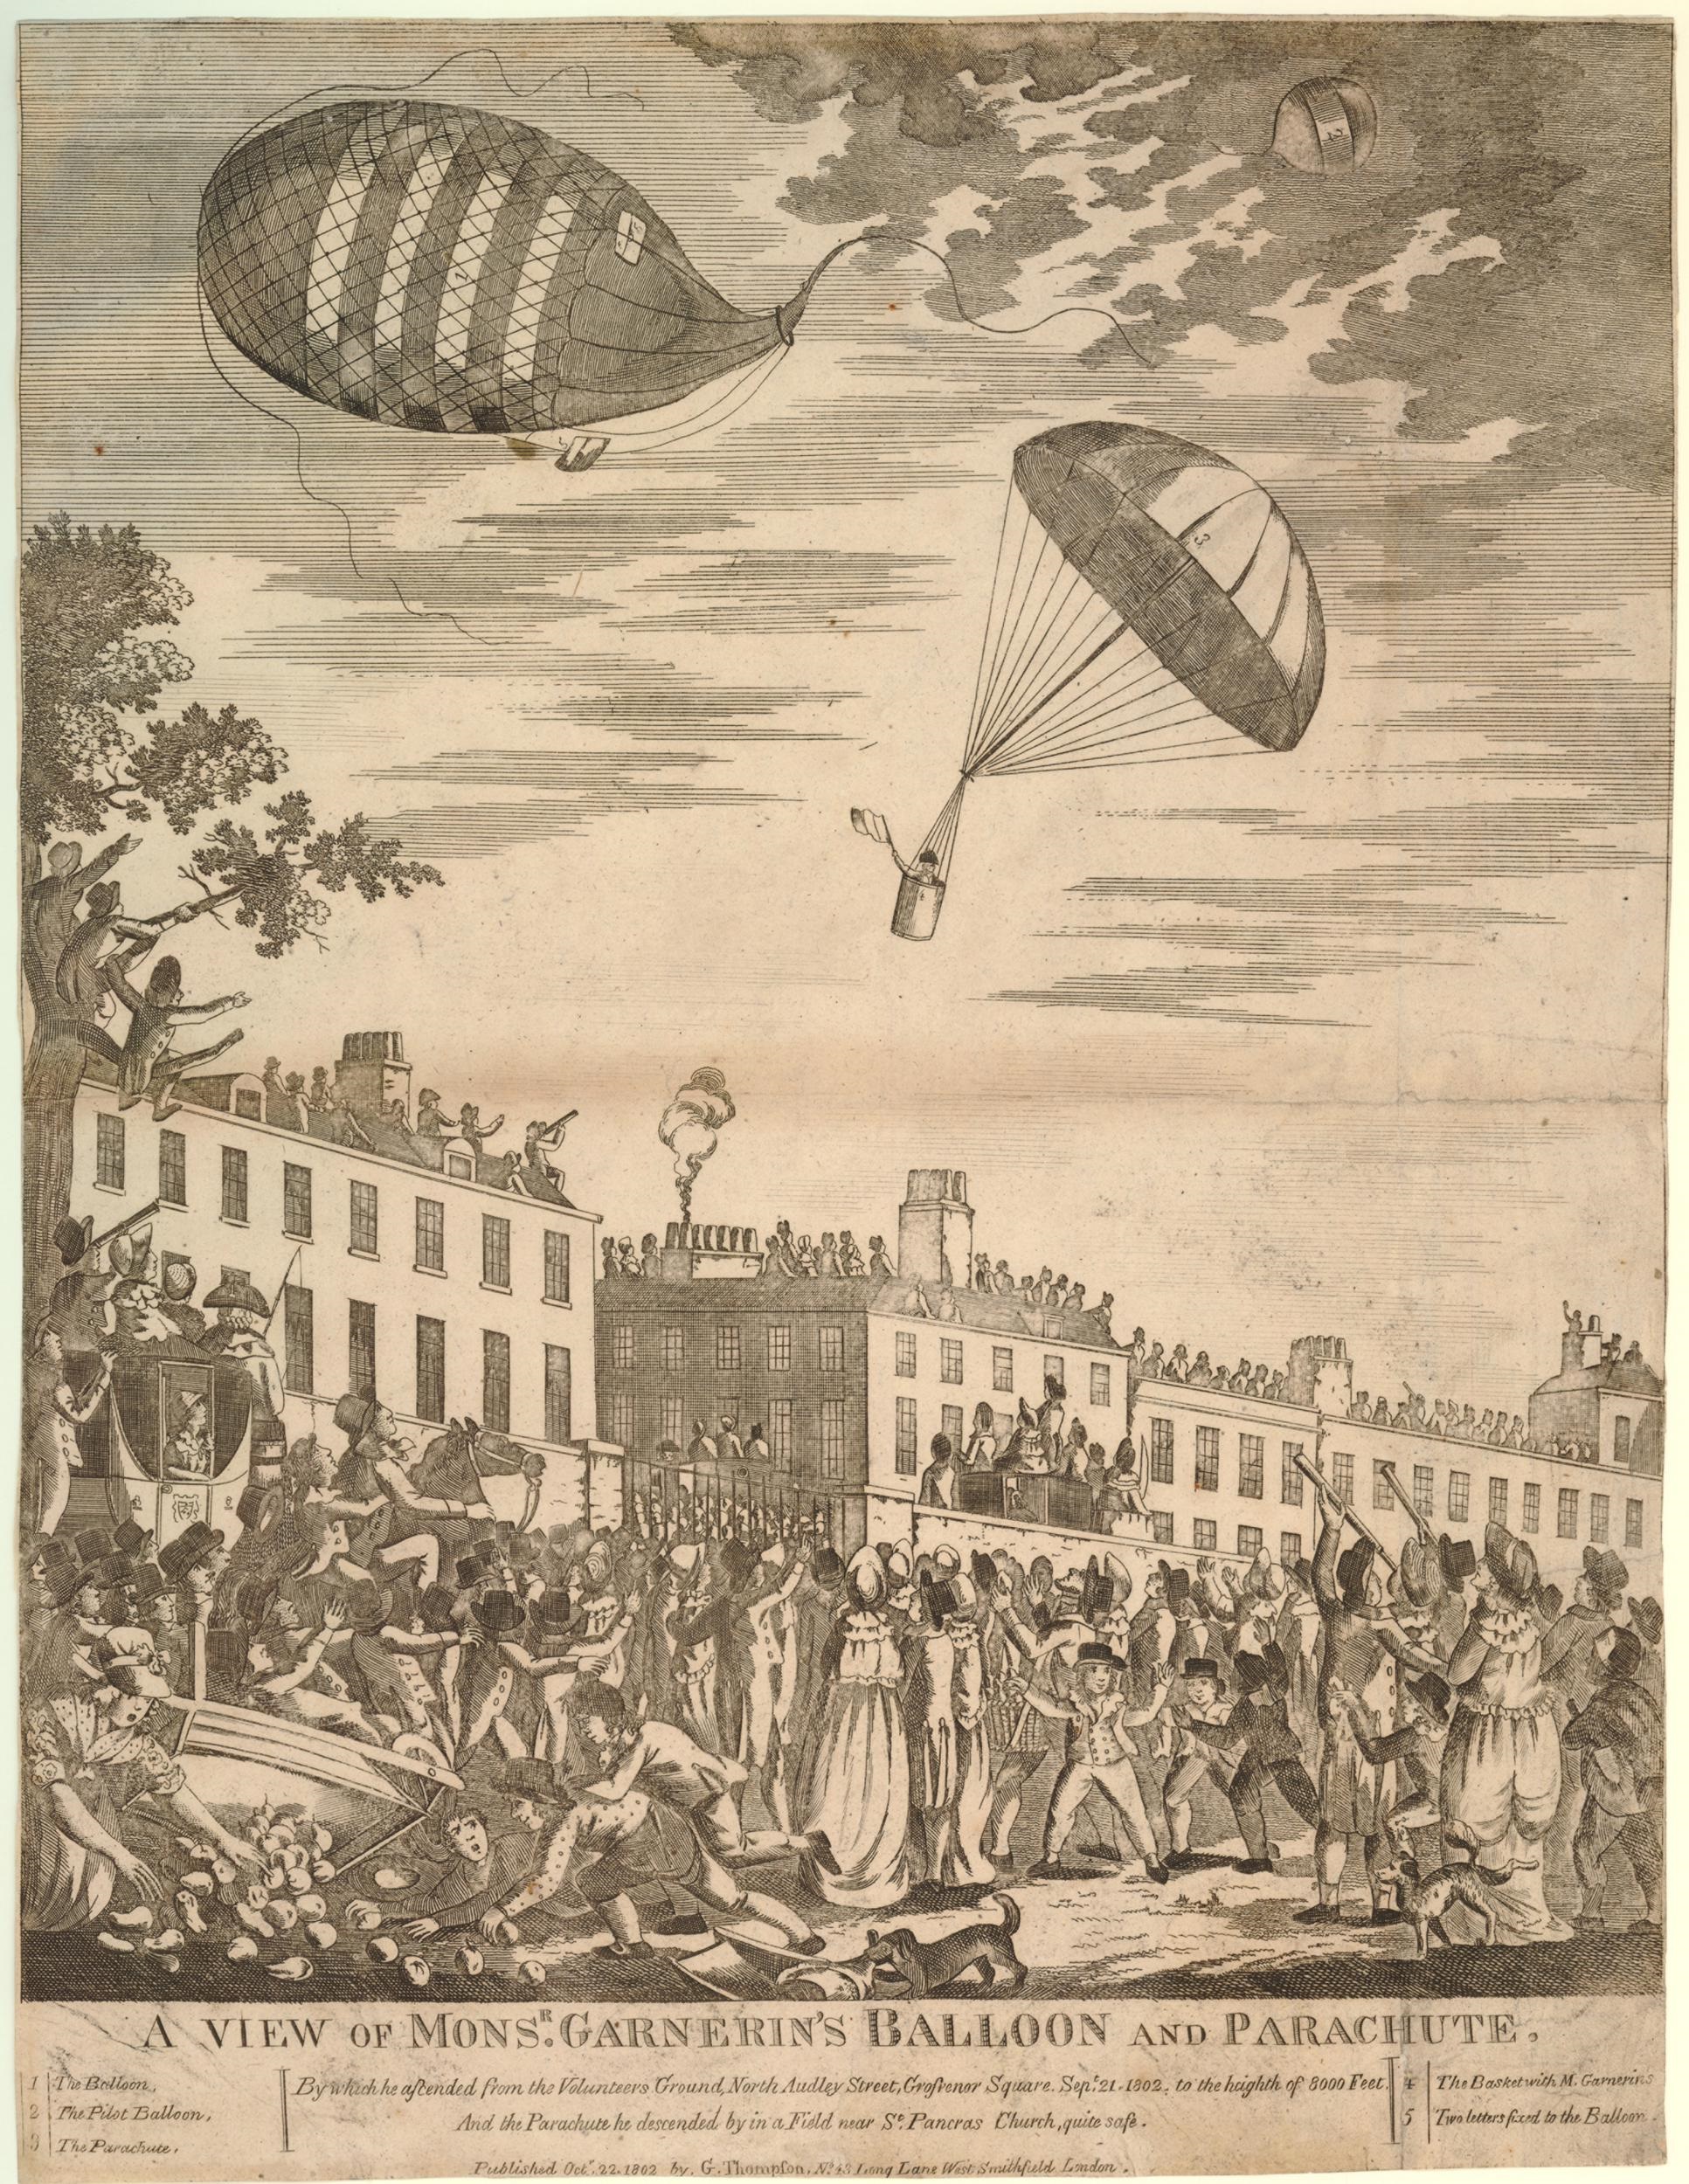 André Jacques Garnerin descending from a balloon by parachute in a field near St Pancras Church British Museum